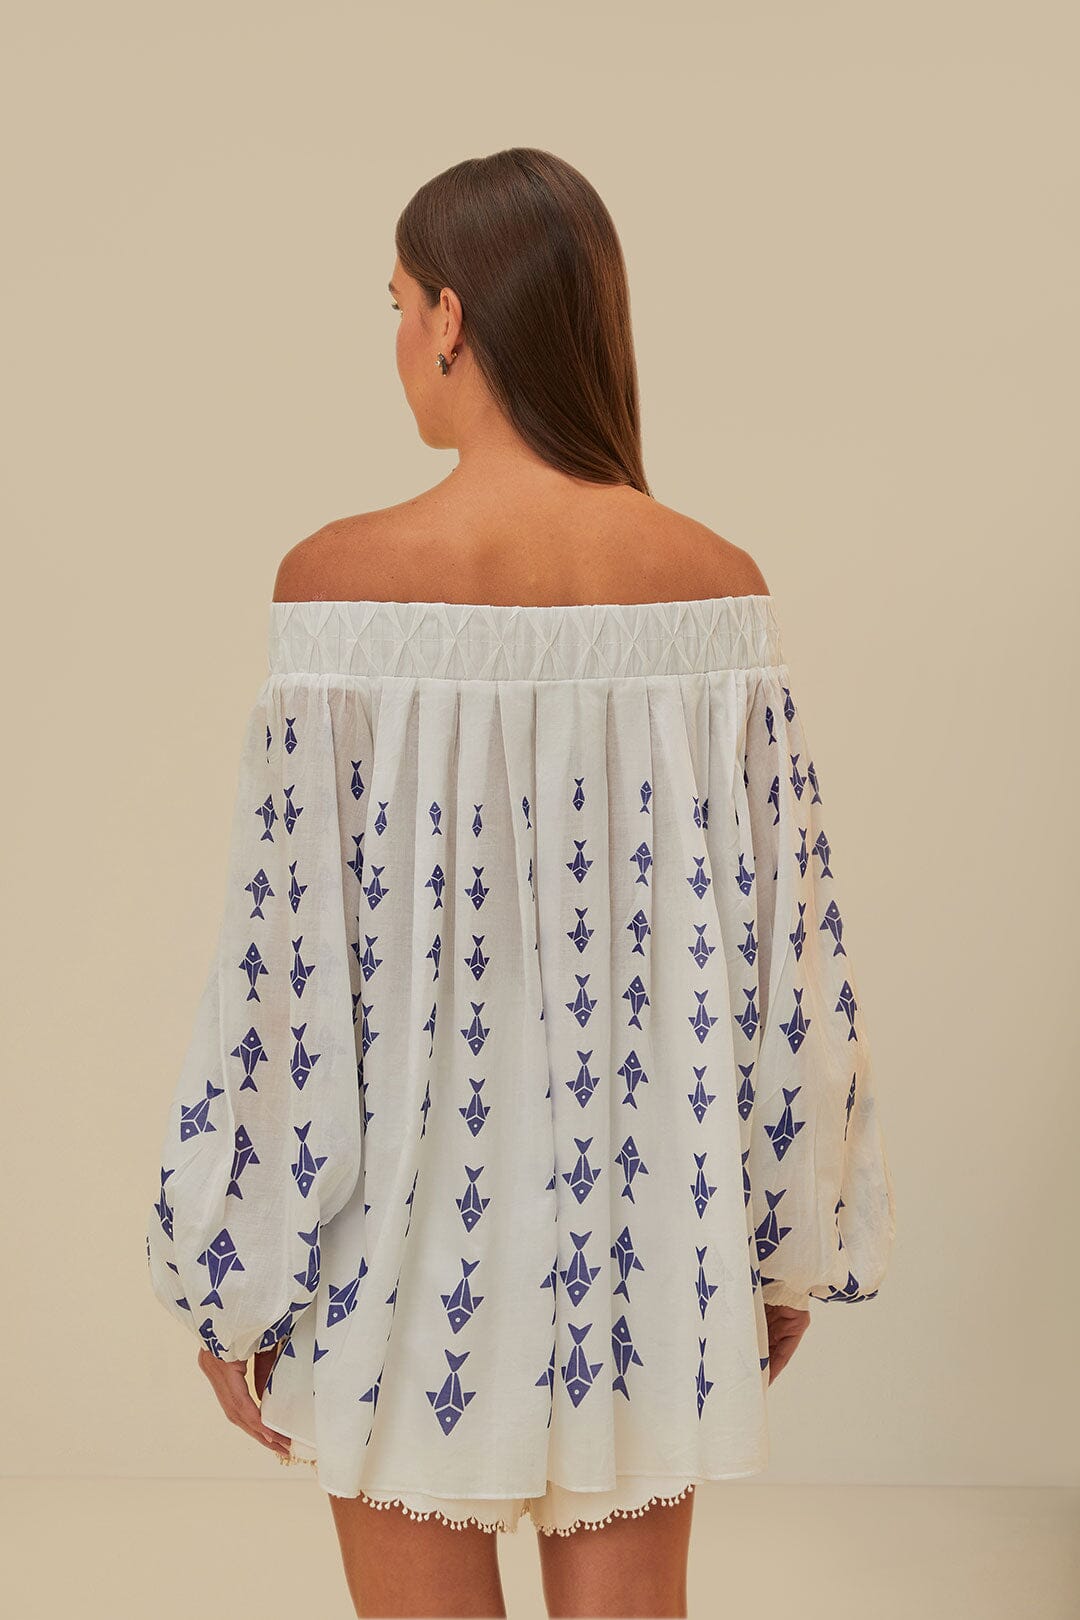 Off-White Graphic Fishes Off-Shoulder Blouse